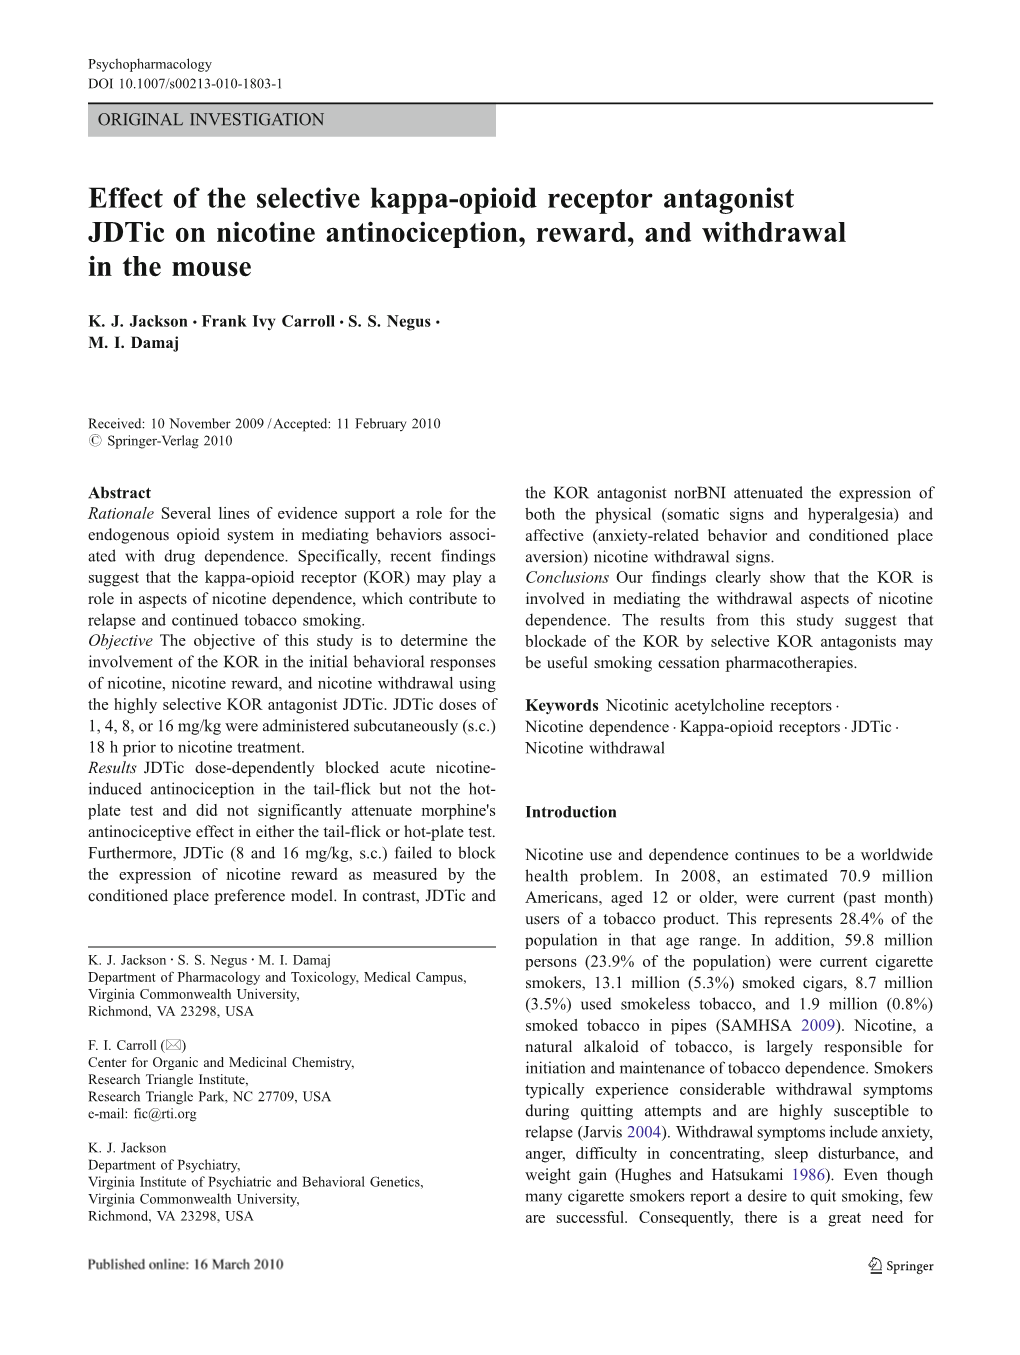 Effect of the Selective Kappa-Opioid Receptor Antagonist Jdtic on Nicotine Antinociception, Reward, and Withdrawal in the Mouse